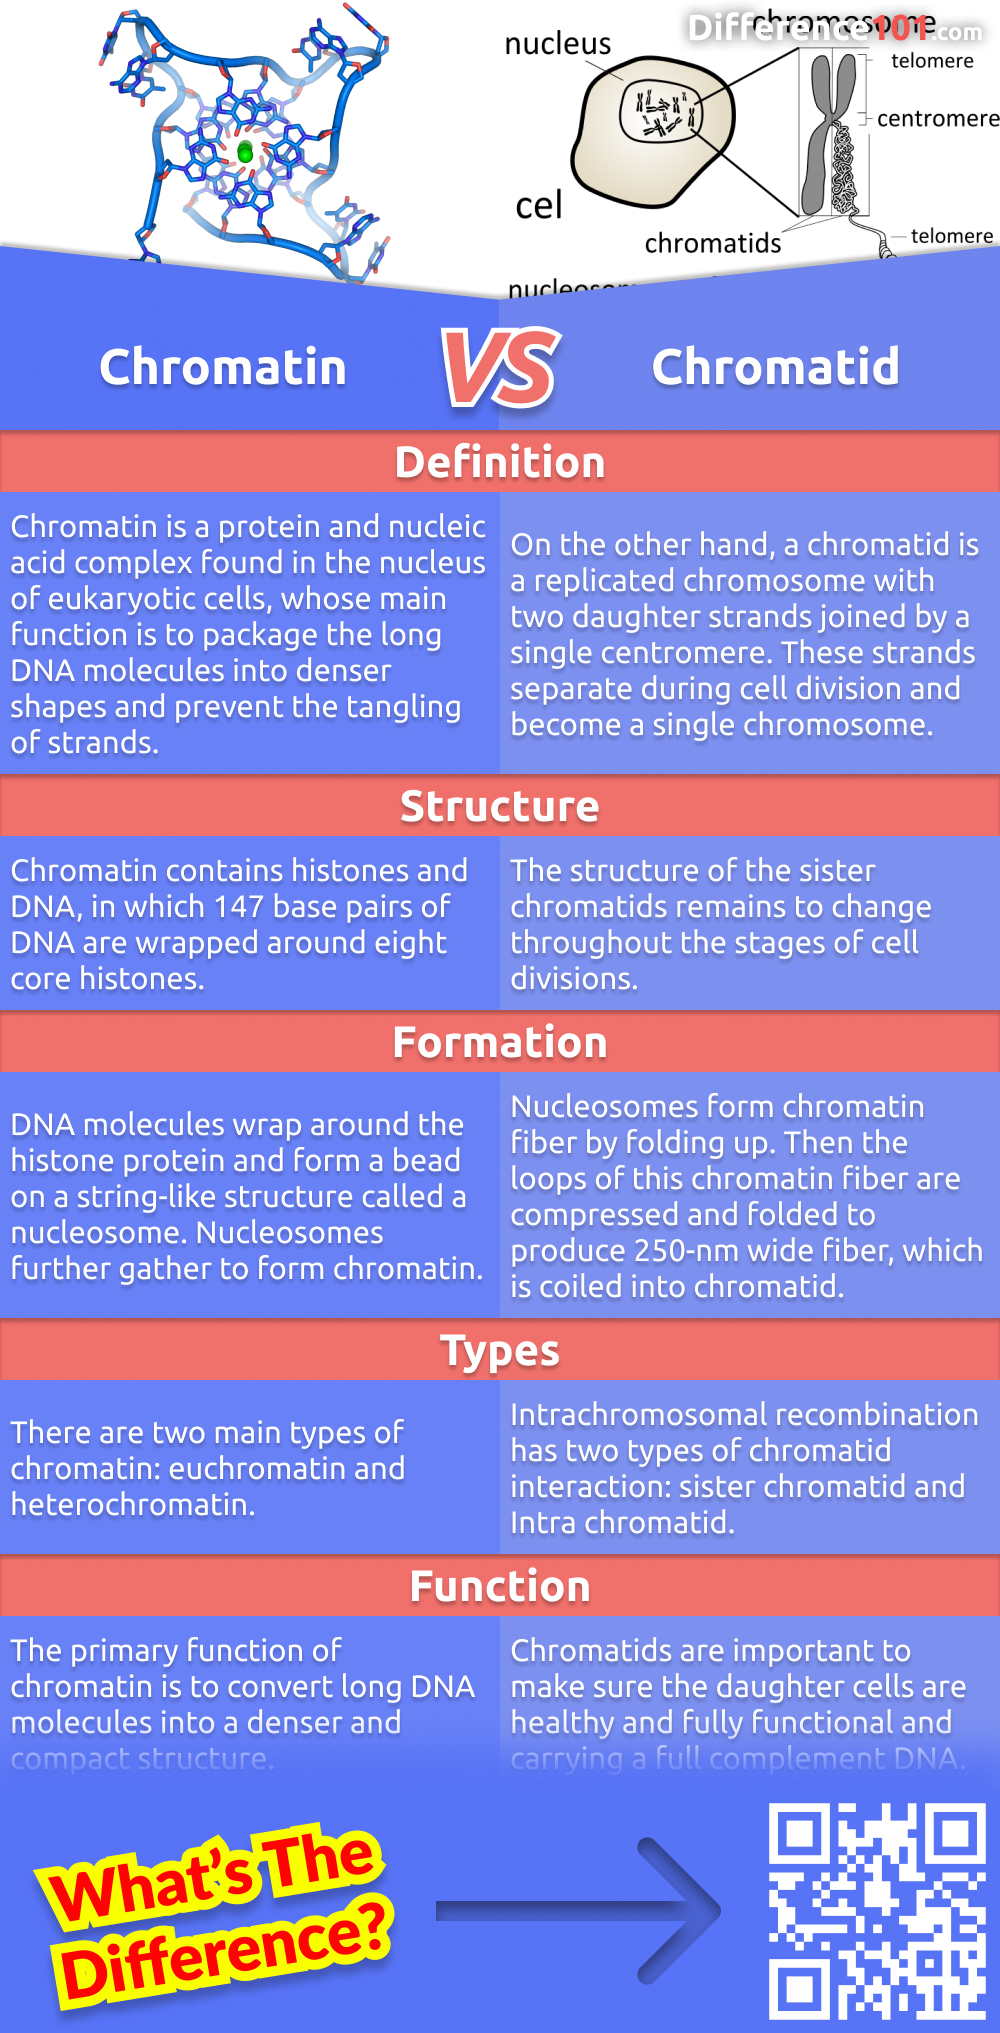 What's the difference between chromatin and chromatid? Chromatin is the material that makes up chromosomes, while chromatids are the two parts of a chromosome that are joined together during cell division. Read more here.